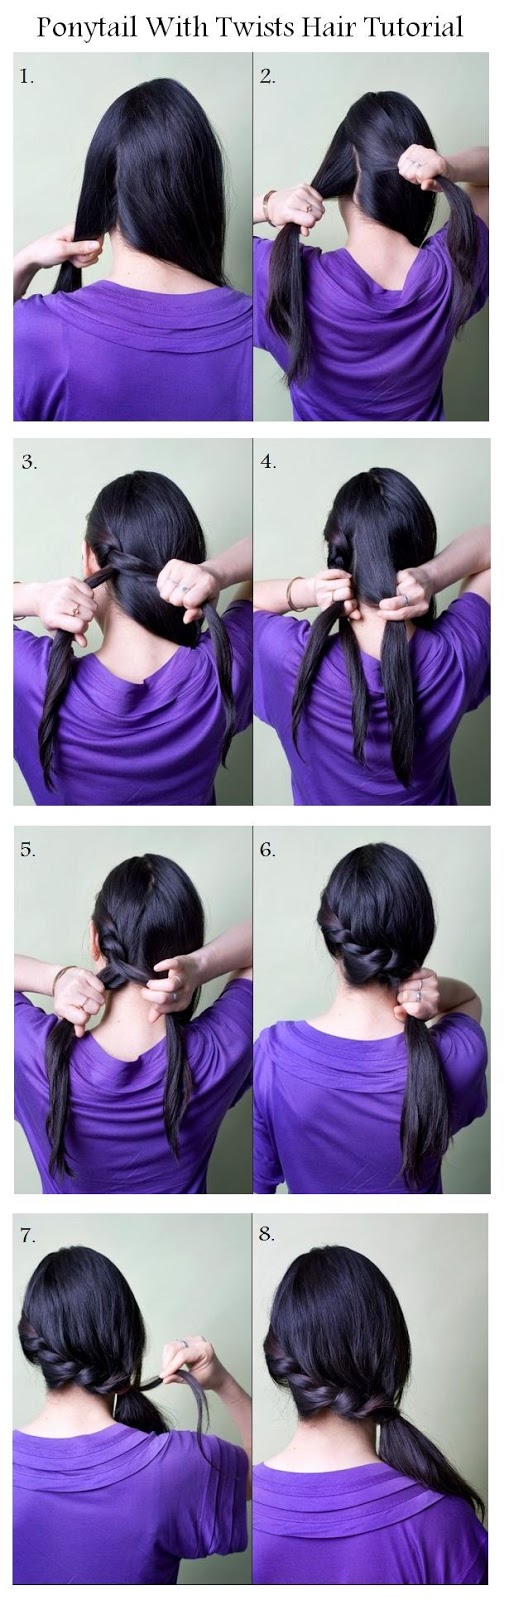 Ponytail With Twists Hair Tutorial